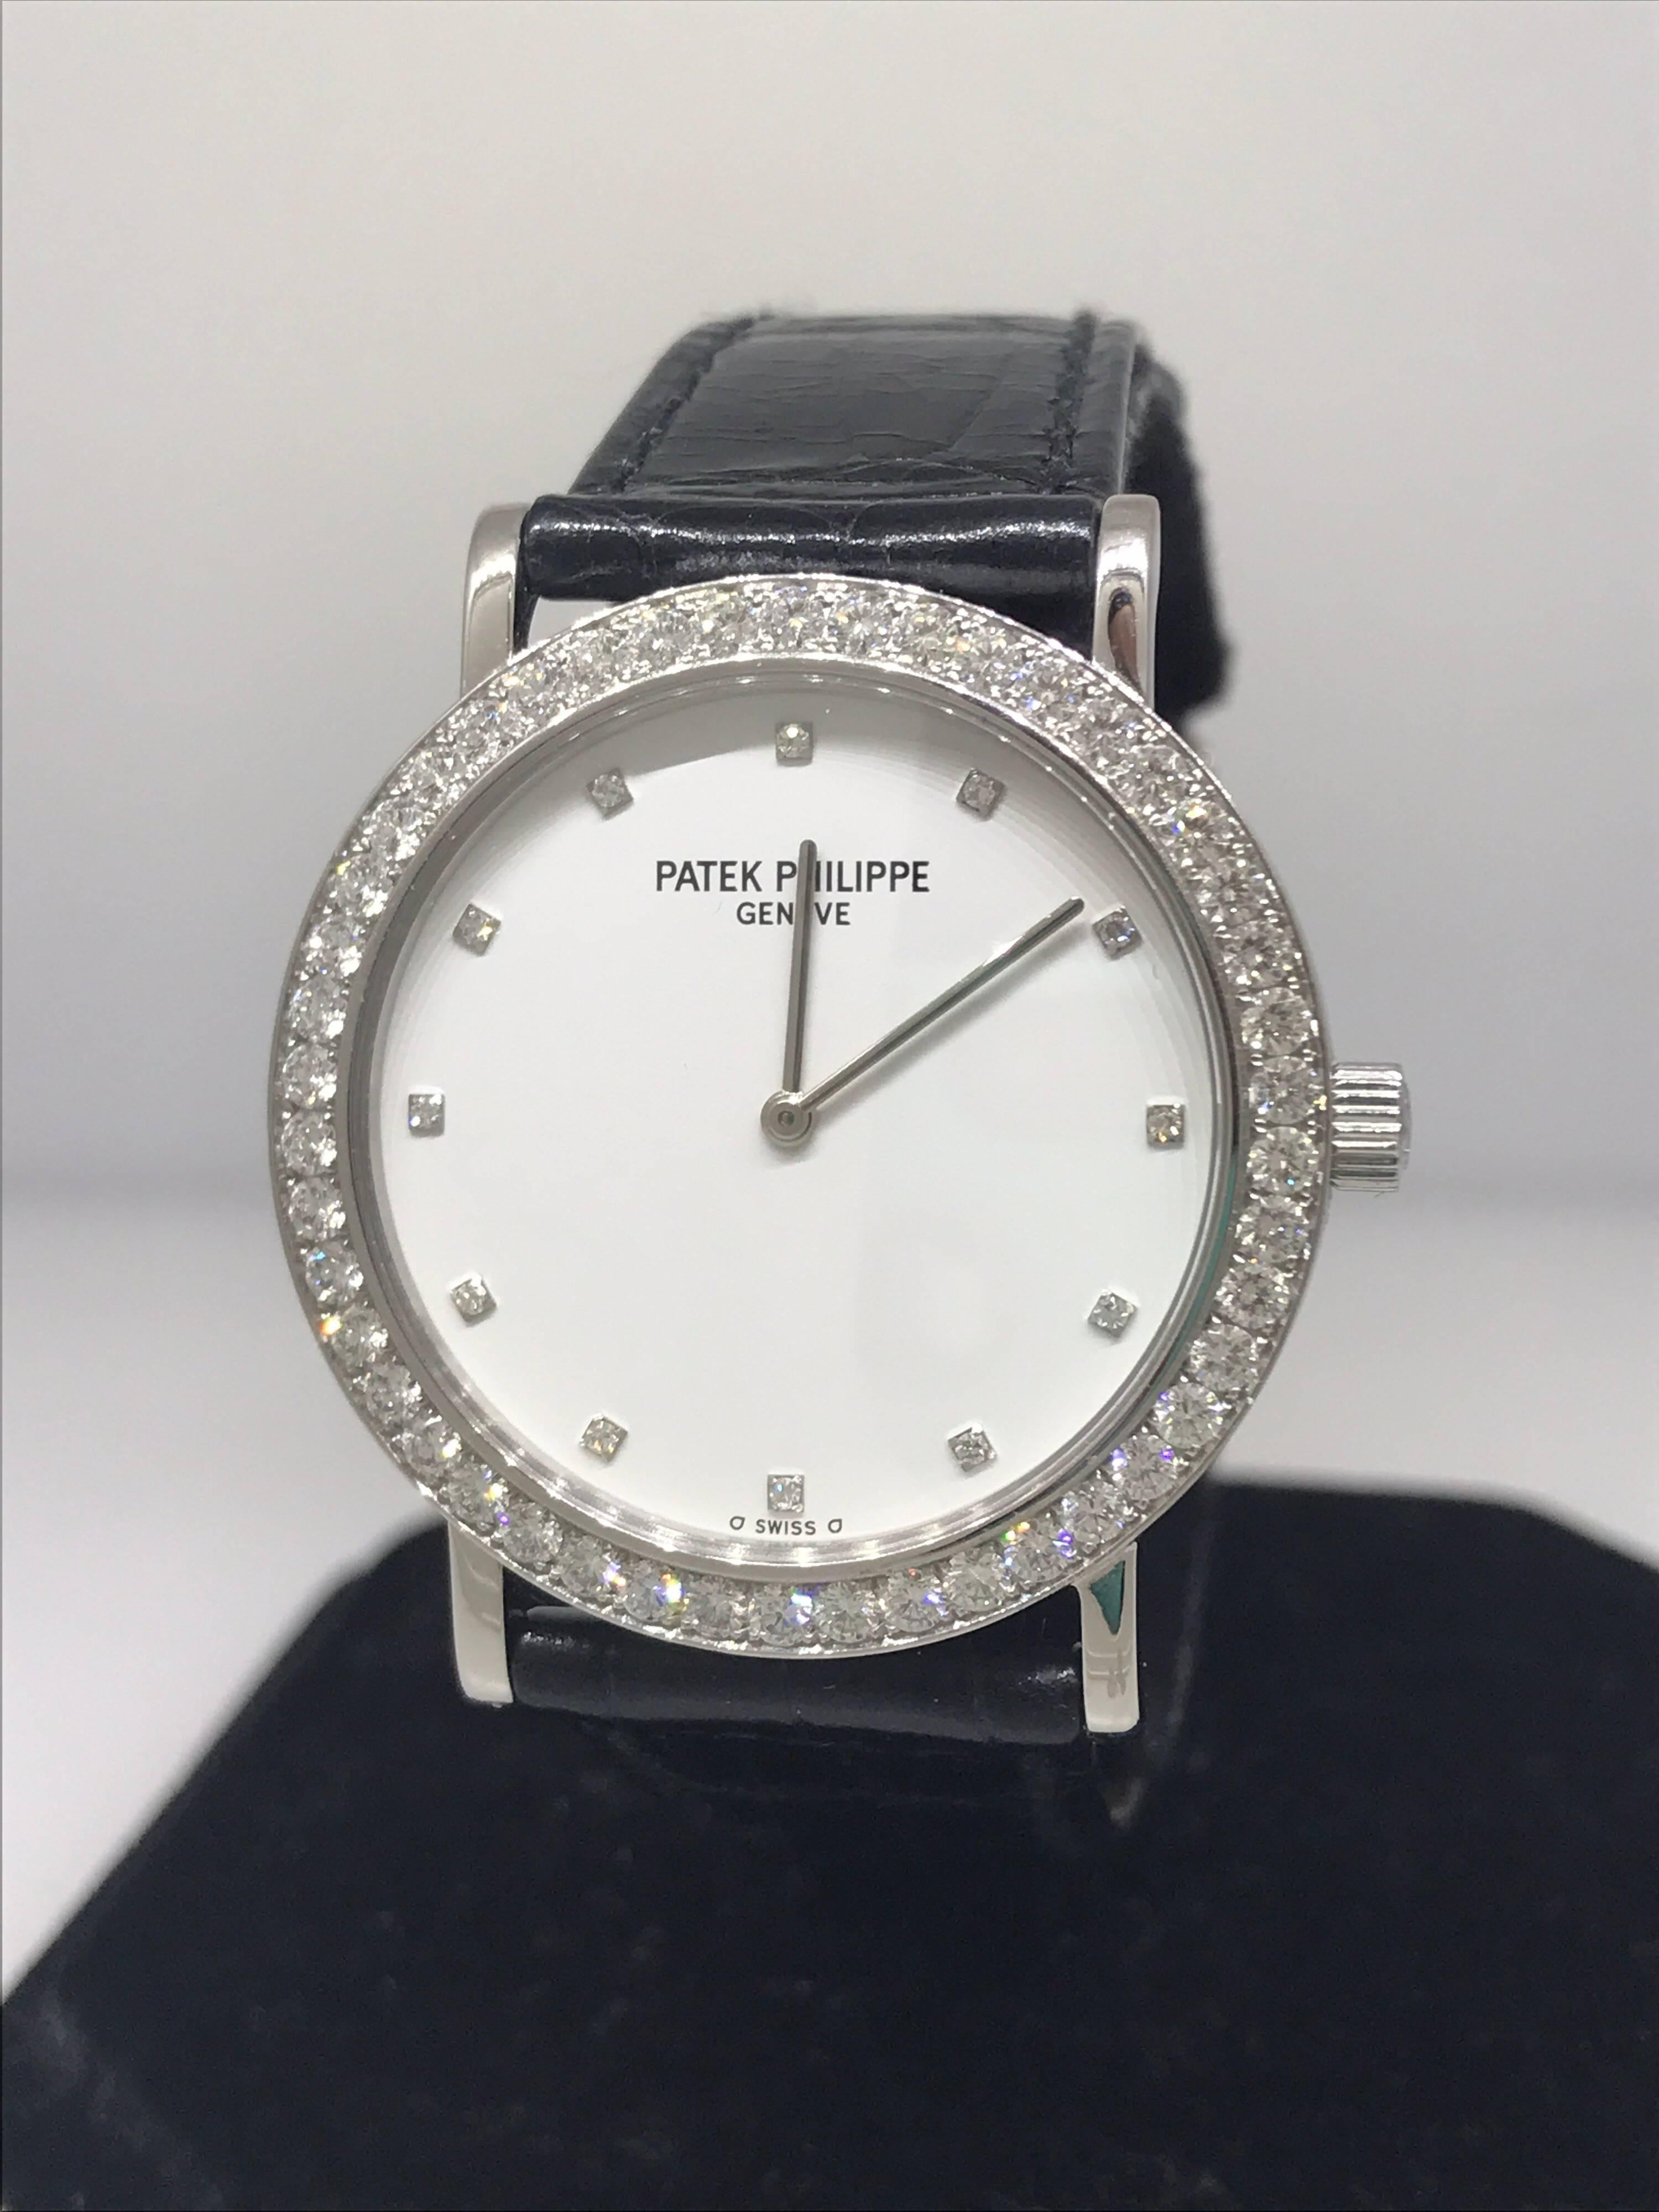 Patek Philippe Calatrava Ladies Watch

Model Number: 5006G

100% Authentic

Pre-owned - Pristine Condition

Comes with original Patek Philippe box and instruction manual

18 Karat White Gold Case & Buckle

Sapphire Crystal

Diamond Bezel 

White